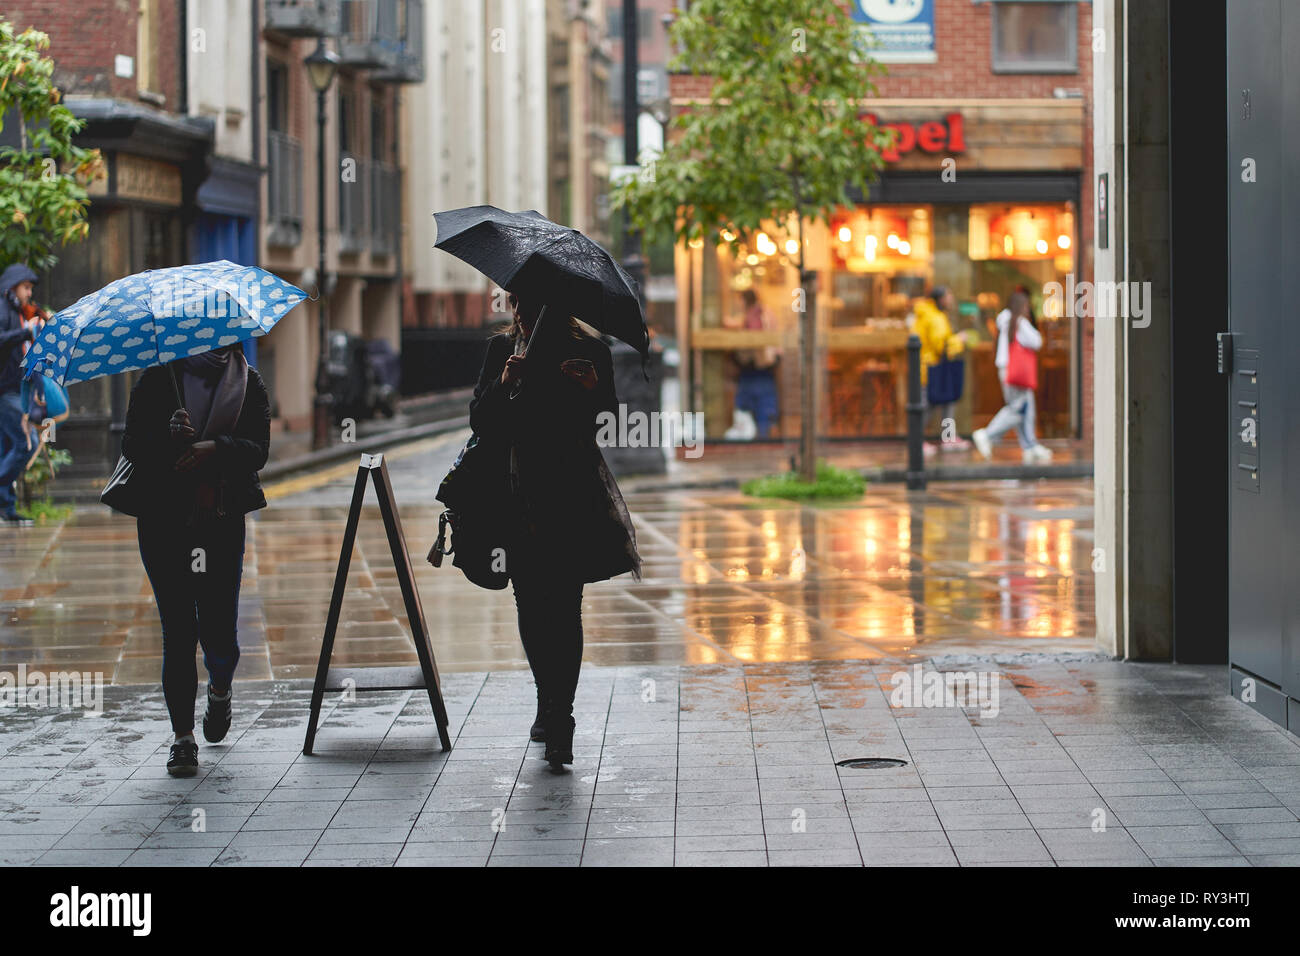 London, UK - March, 2019. Young girls walking with umbrellas under the rain in Shoreditch. Stock Photo